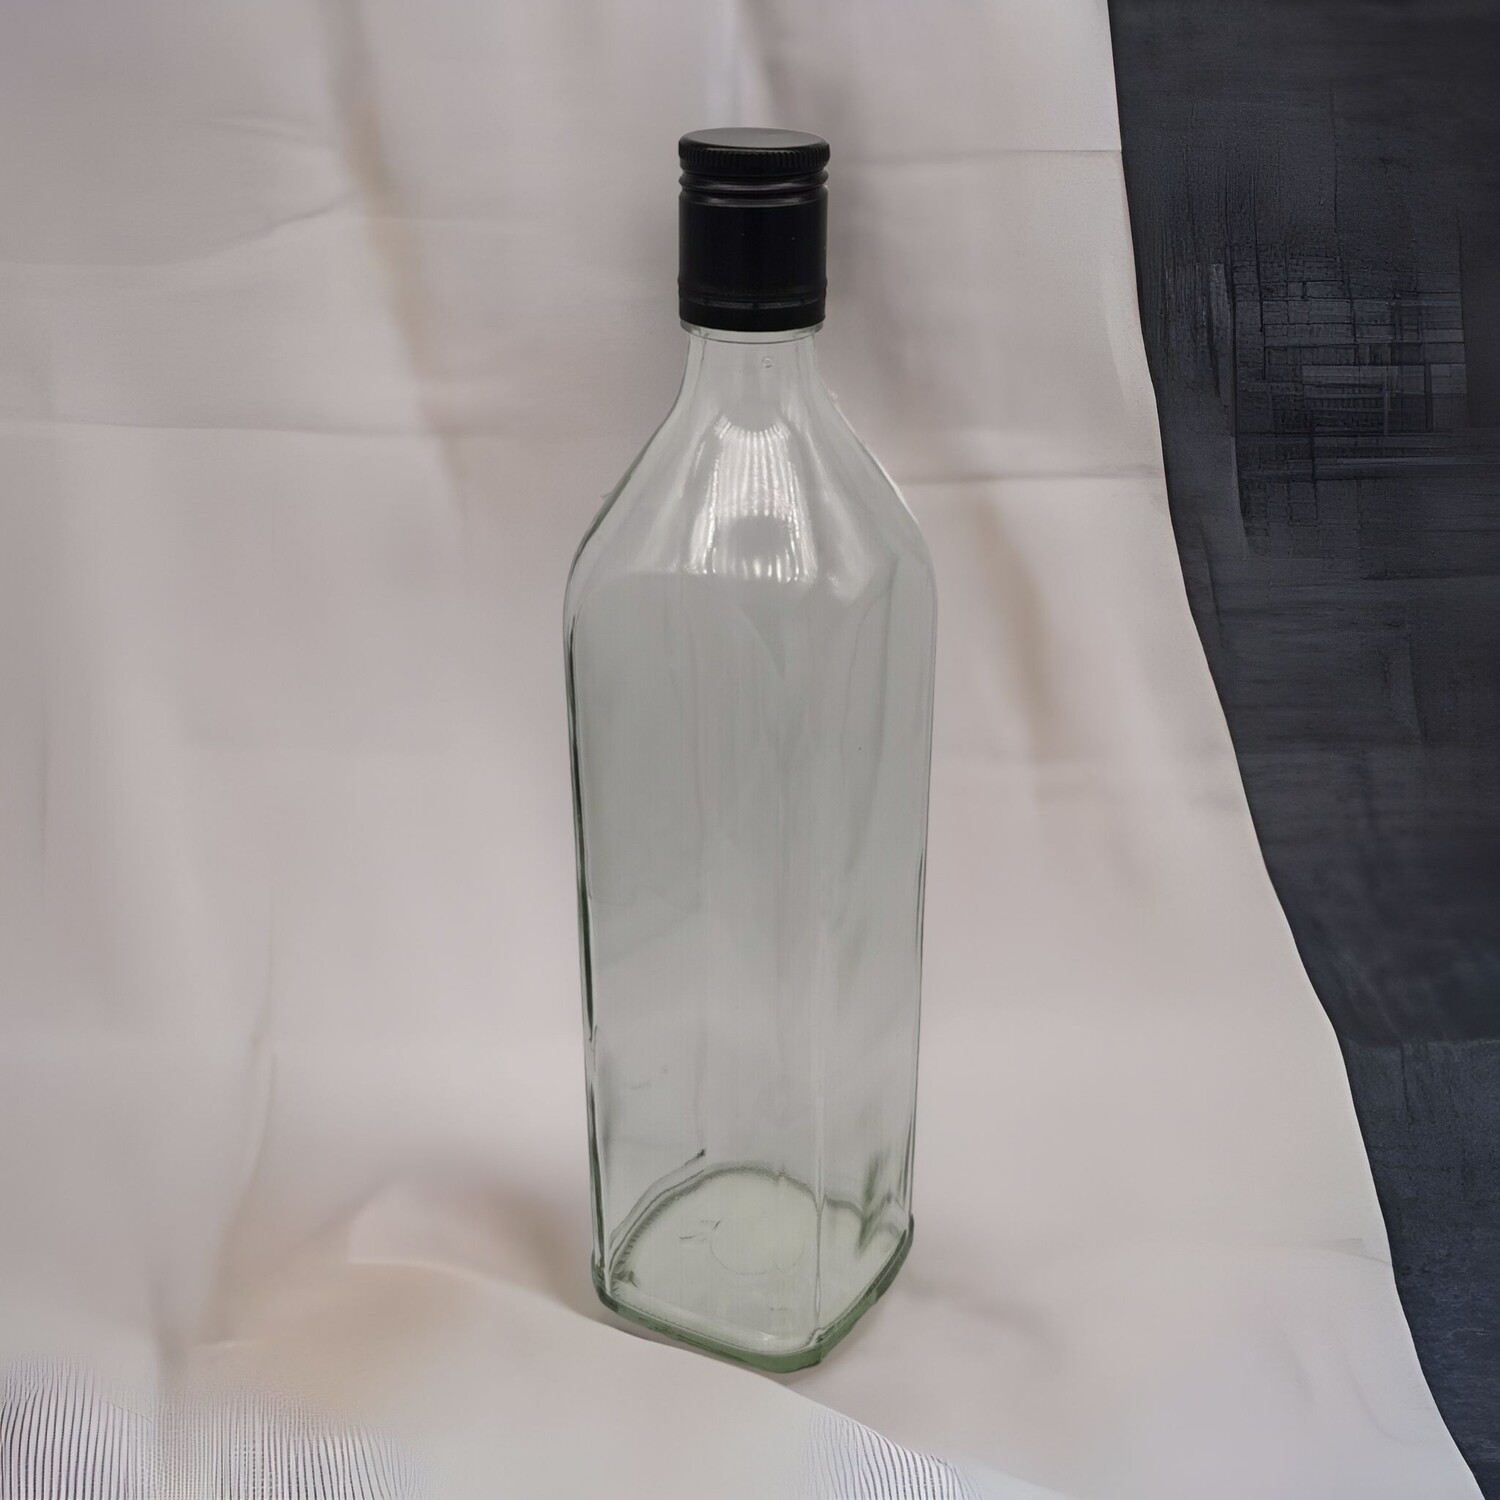 700mL Whisky Spirit Clear Glass Bottle with FREE 29mm BLACK Screw Metal cap